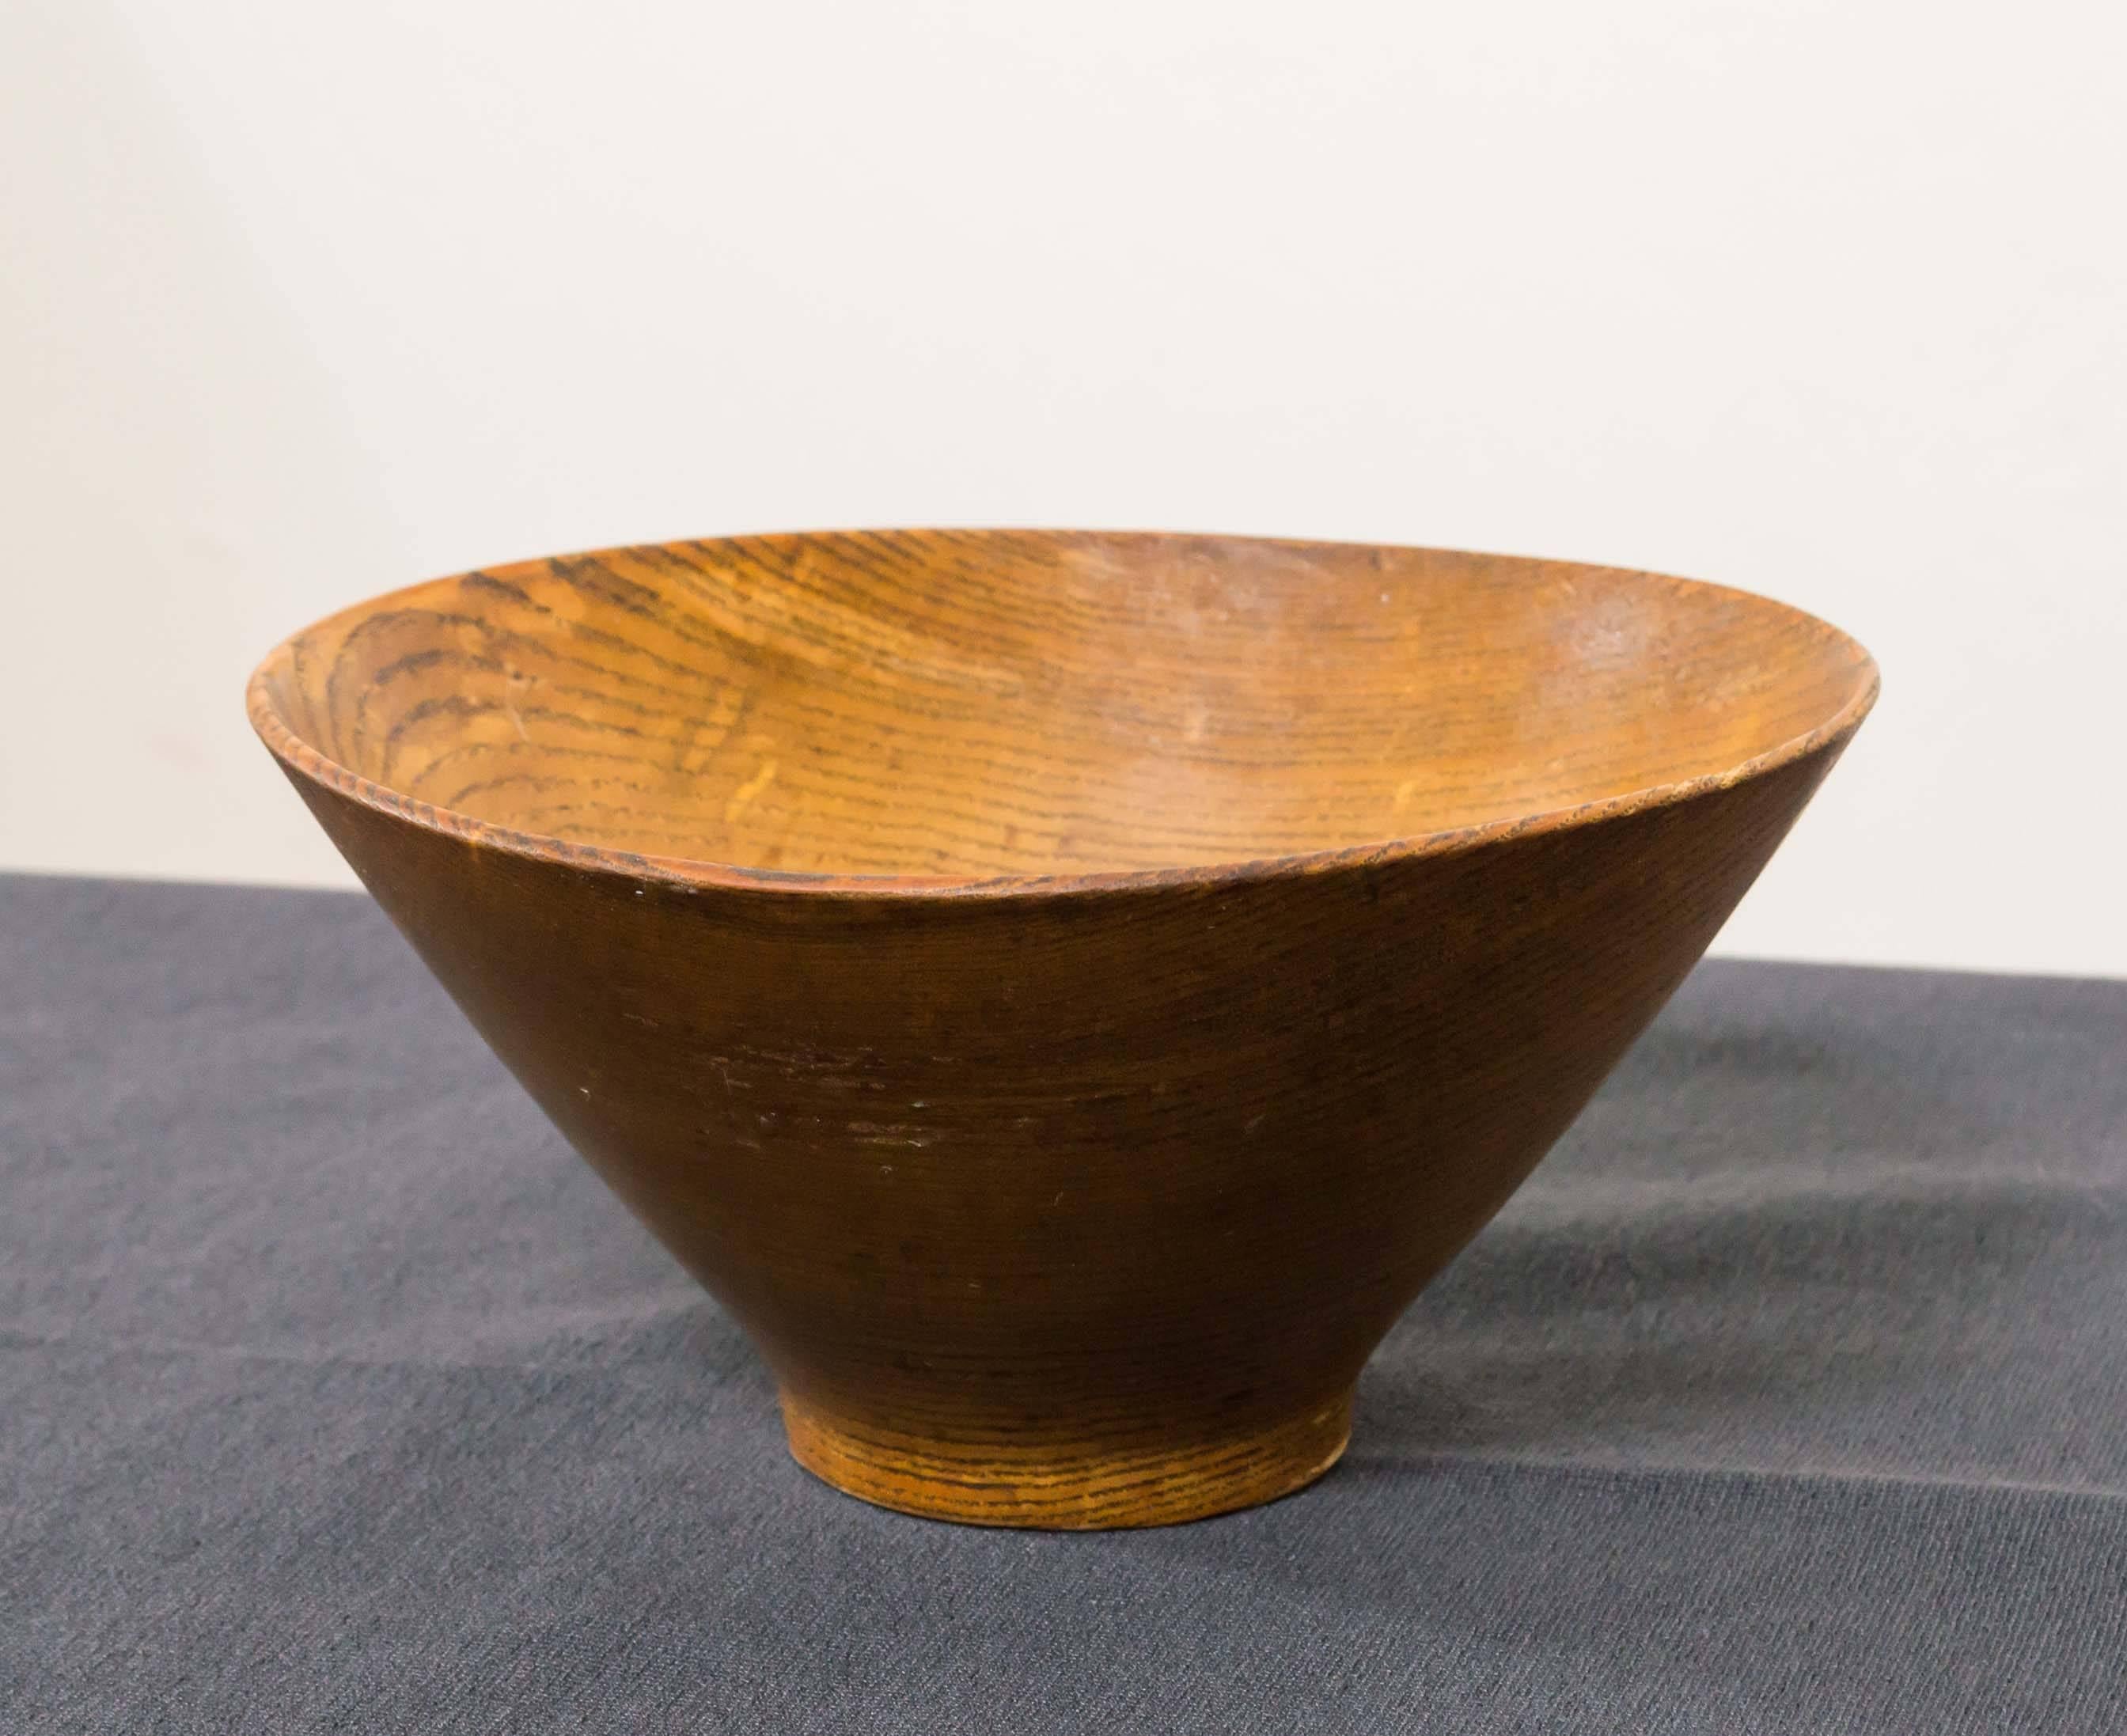 A very collectible turned wood bowl in ash by influential and internationally-renowned American artist Bob Stocksdale (b. 1913 -2003).

This piece exemplifies the best of Mr. Stocksdale’s exacting yet organic artistry. To underscore its studied